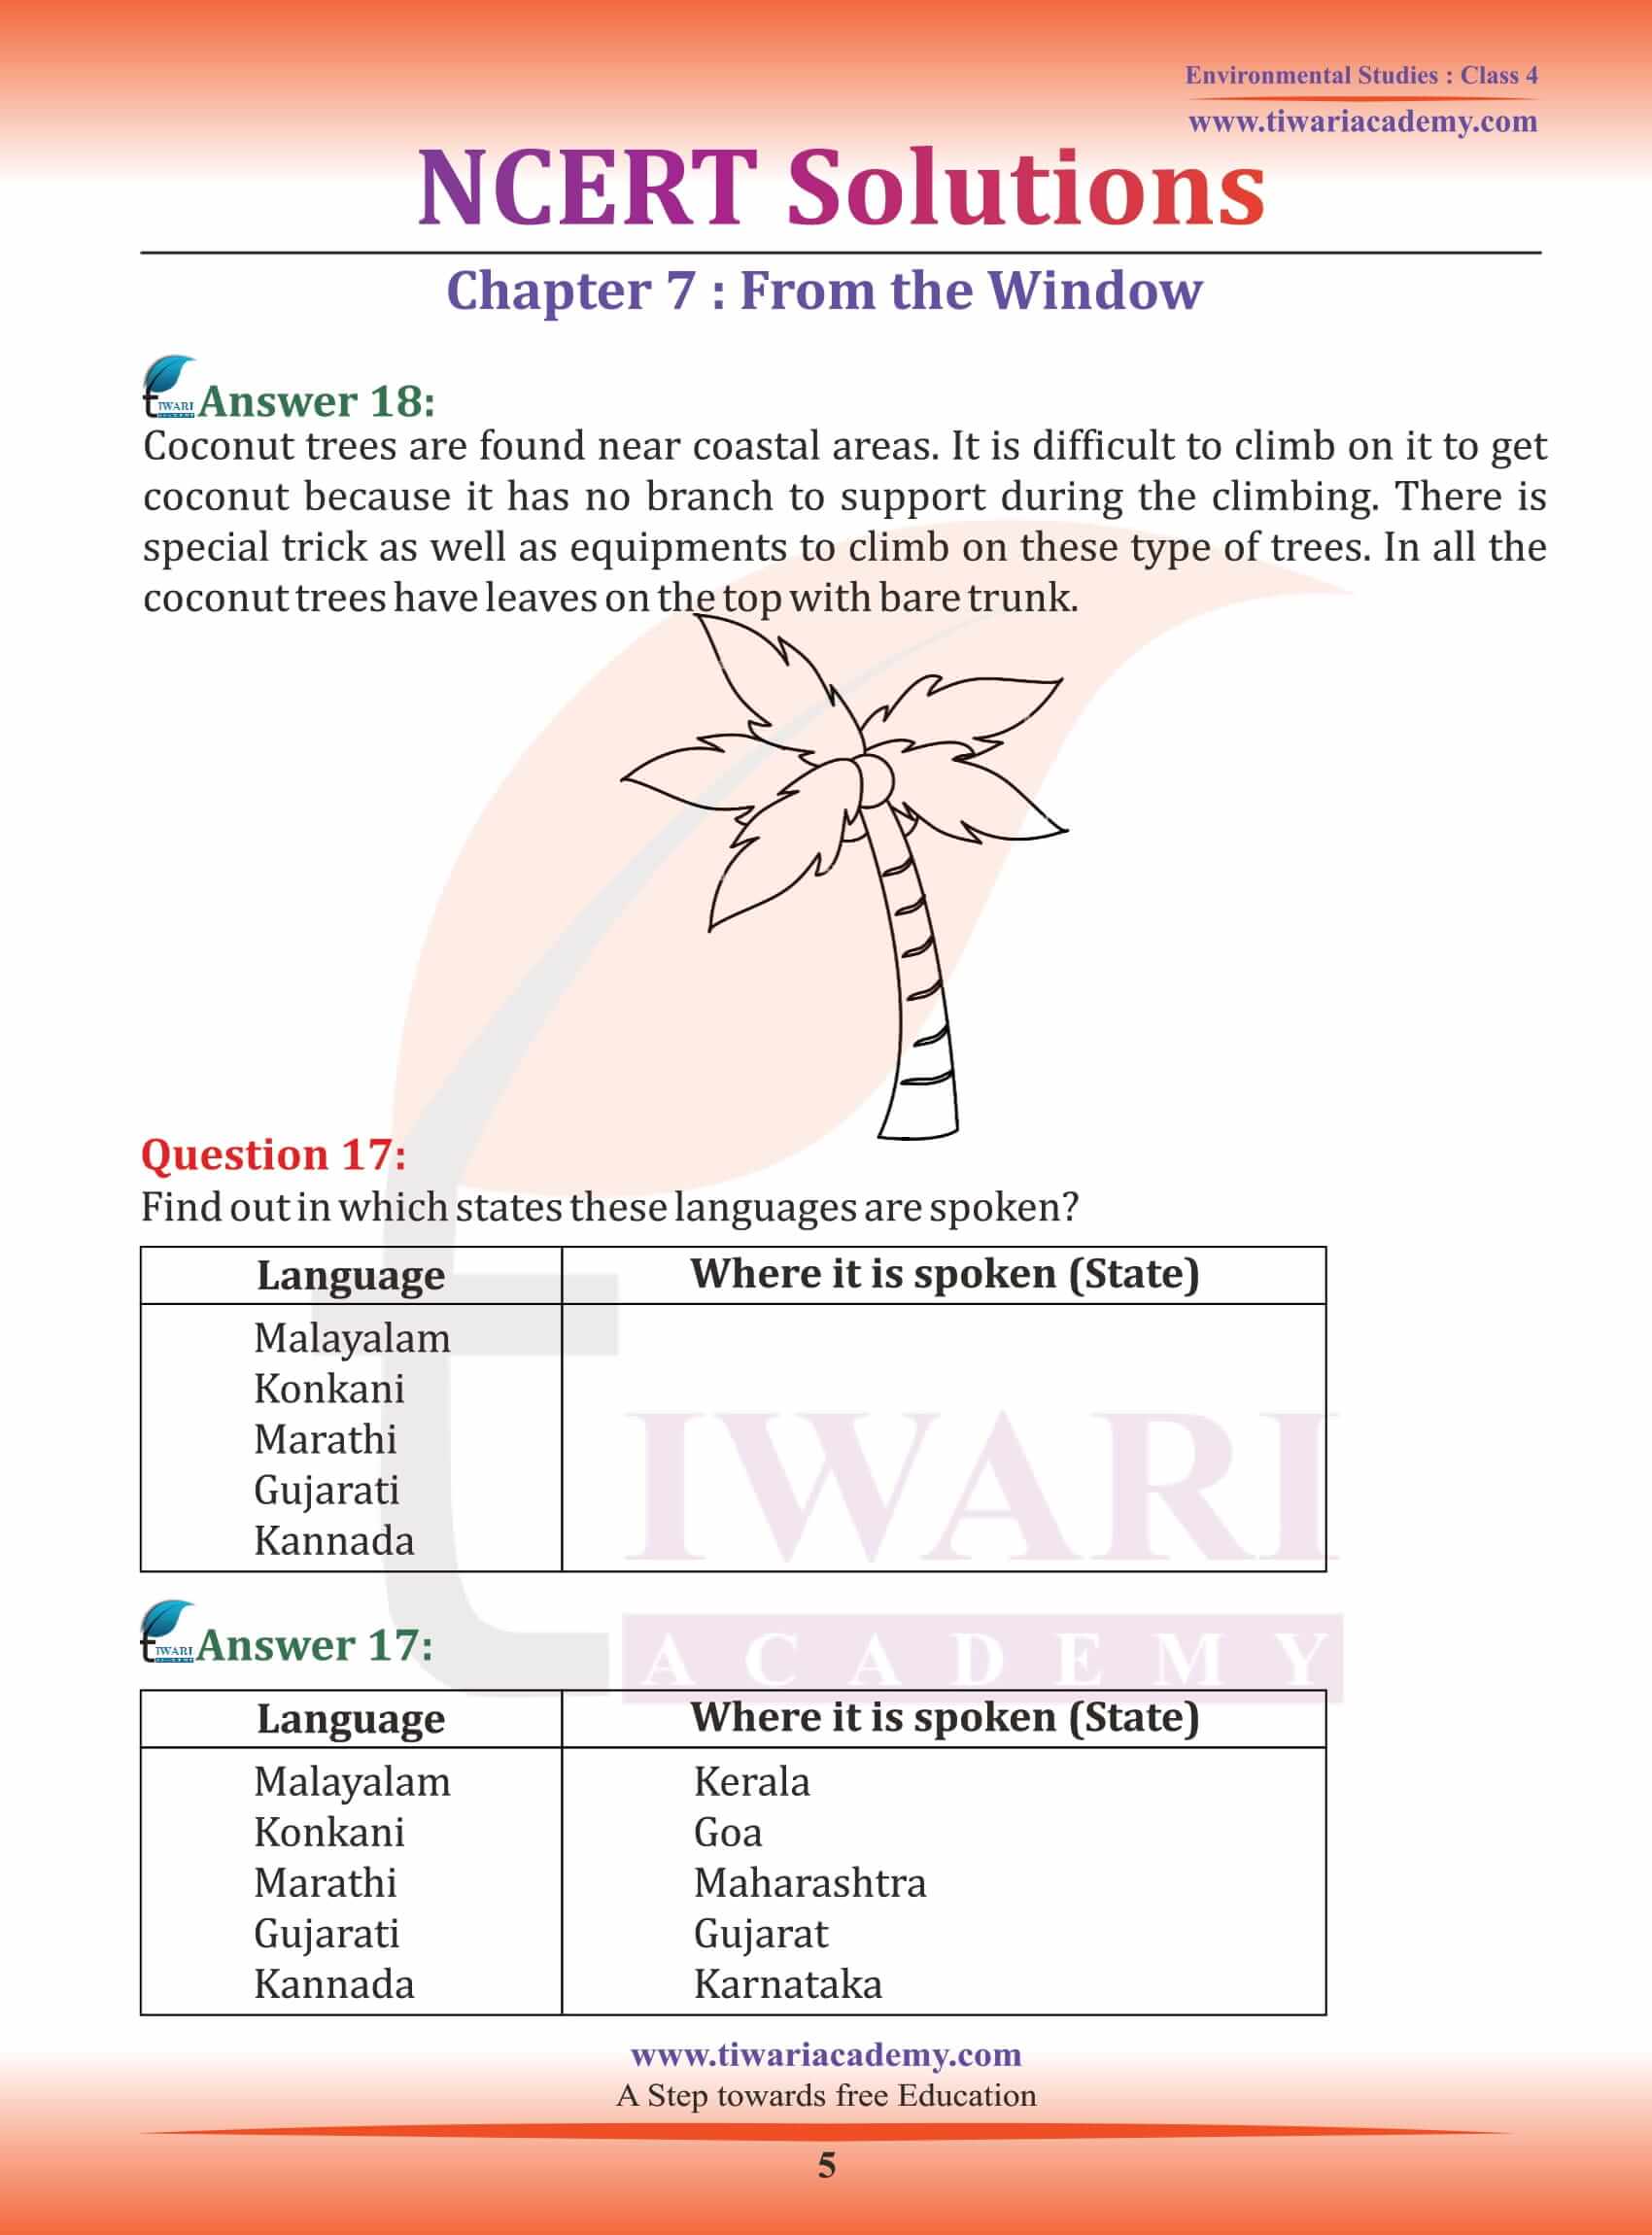 NCERT Solutions for Class 4 EVS Chapter 7 guide free